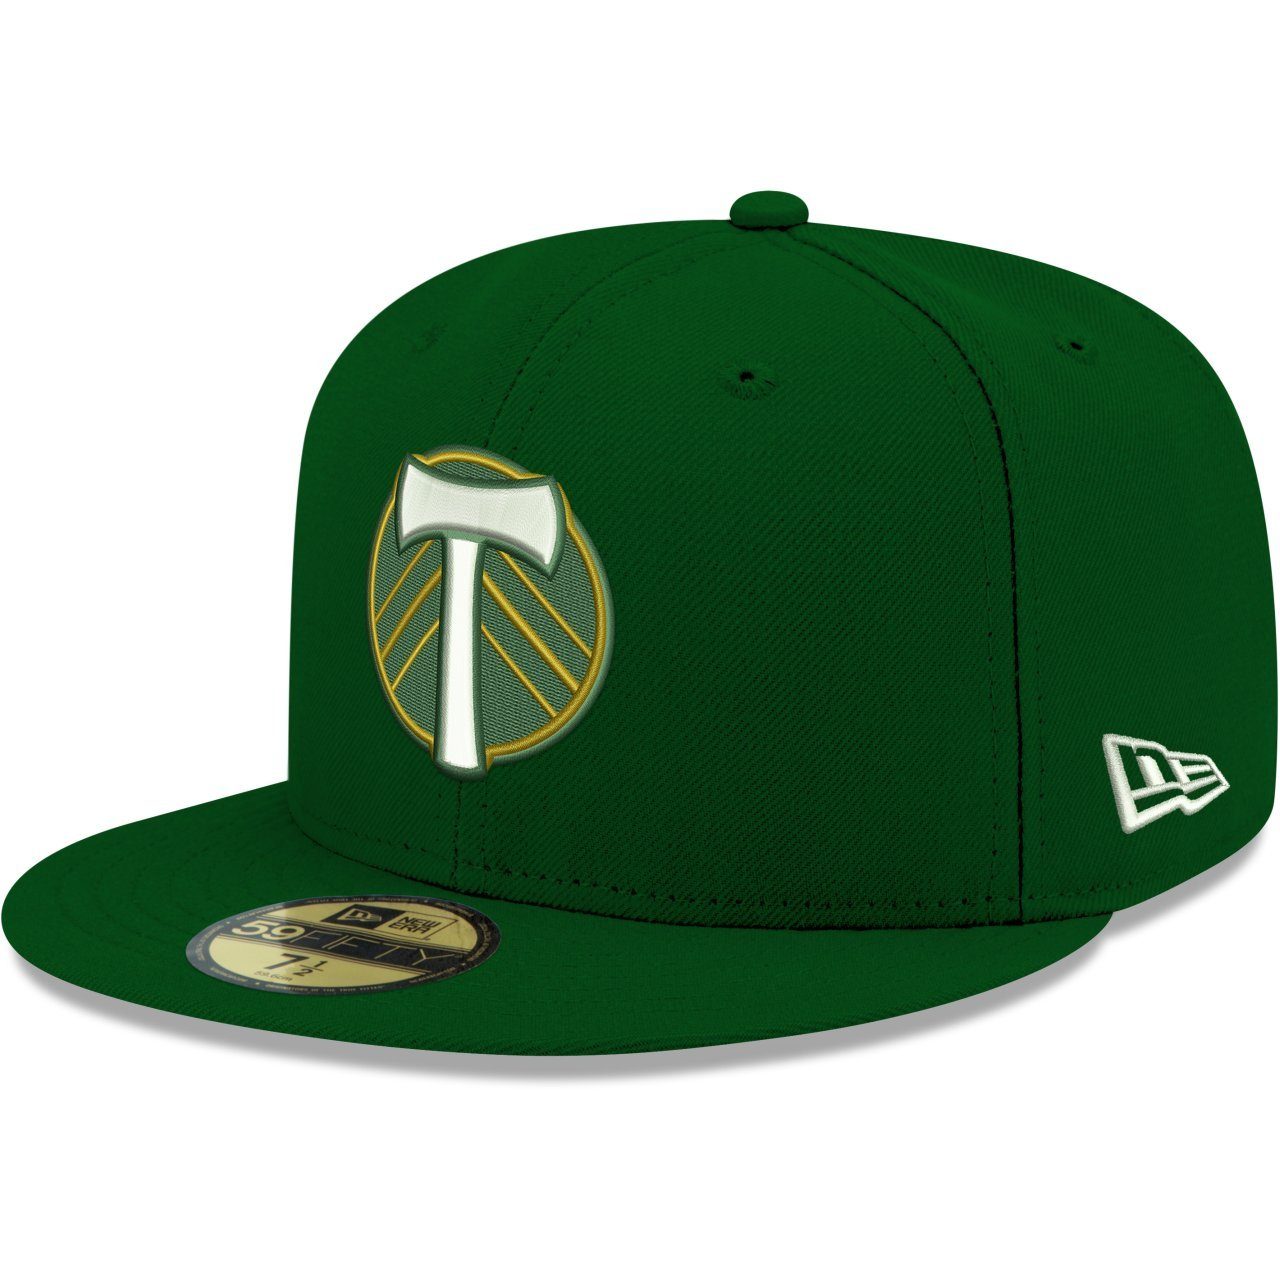 New Era Fitted MLS Timbers 59Fifty Portland Cap